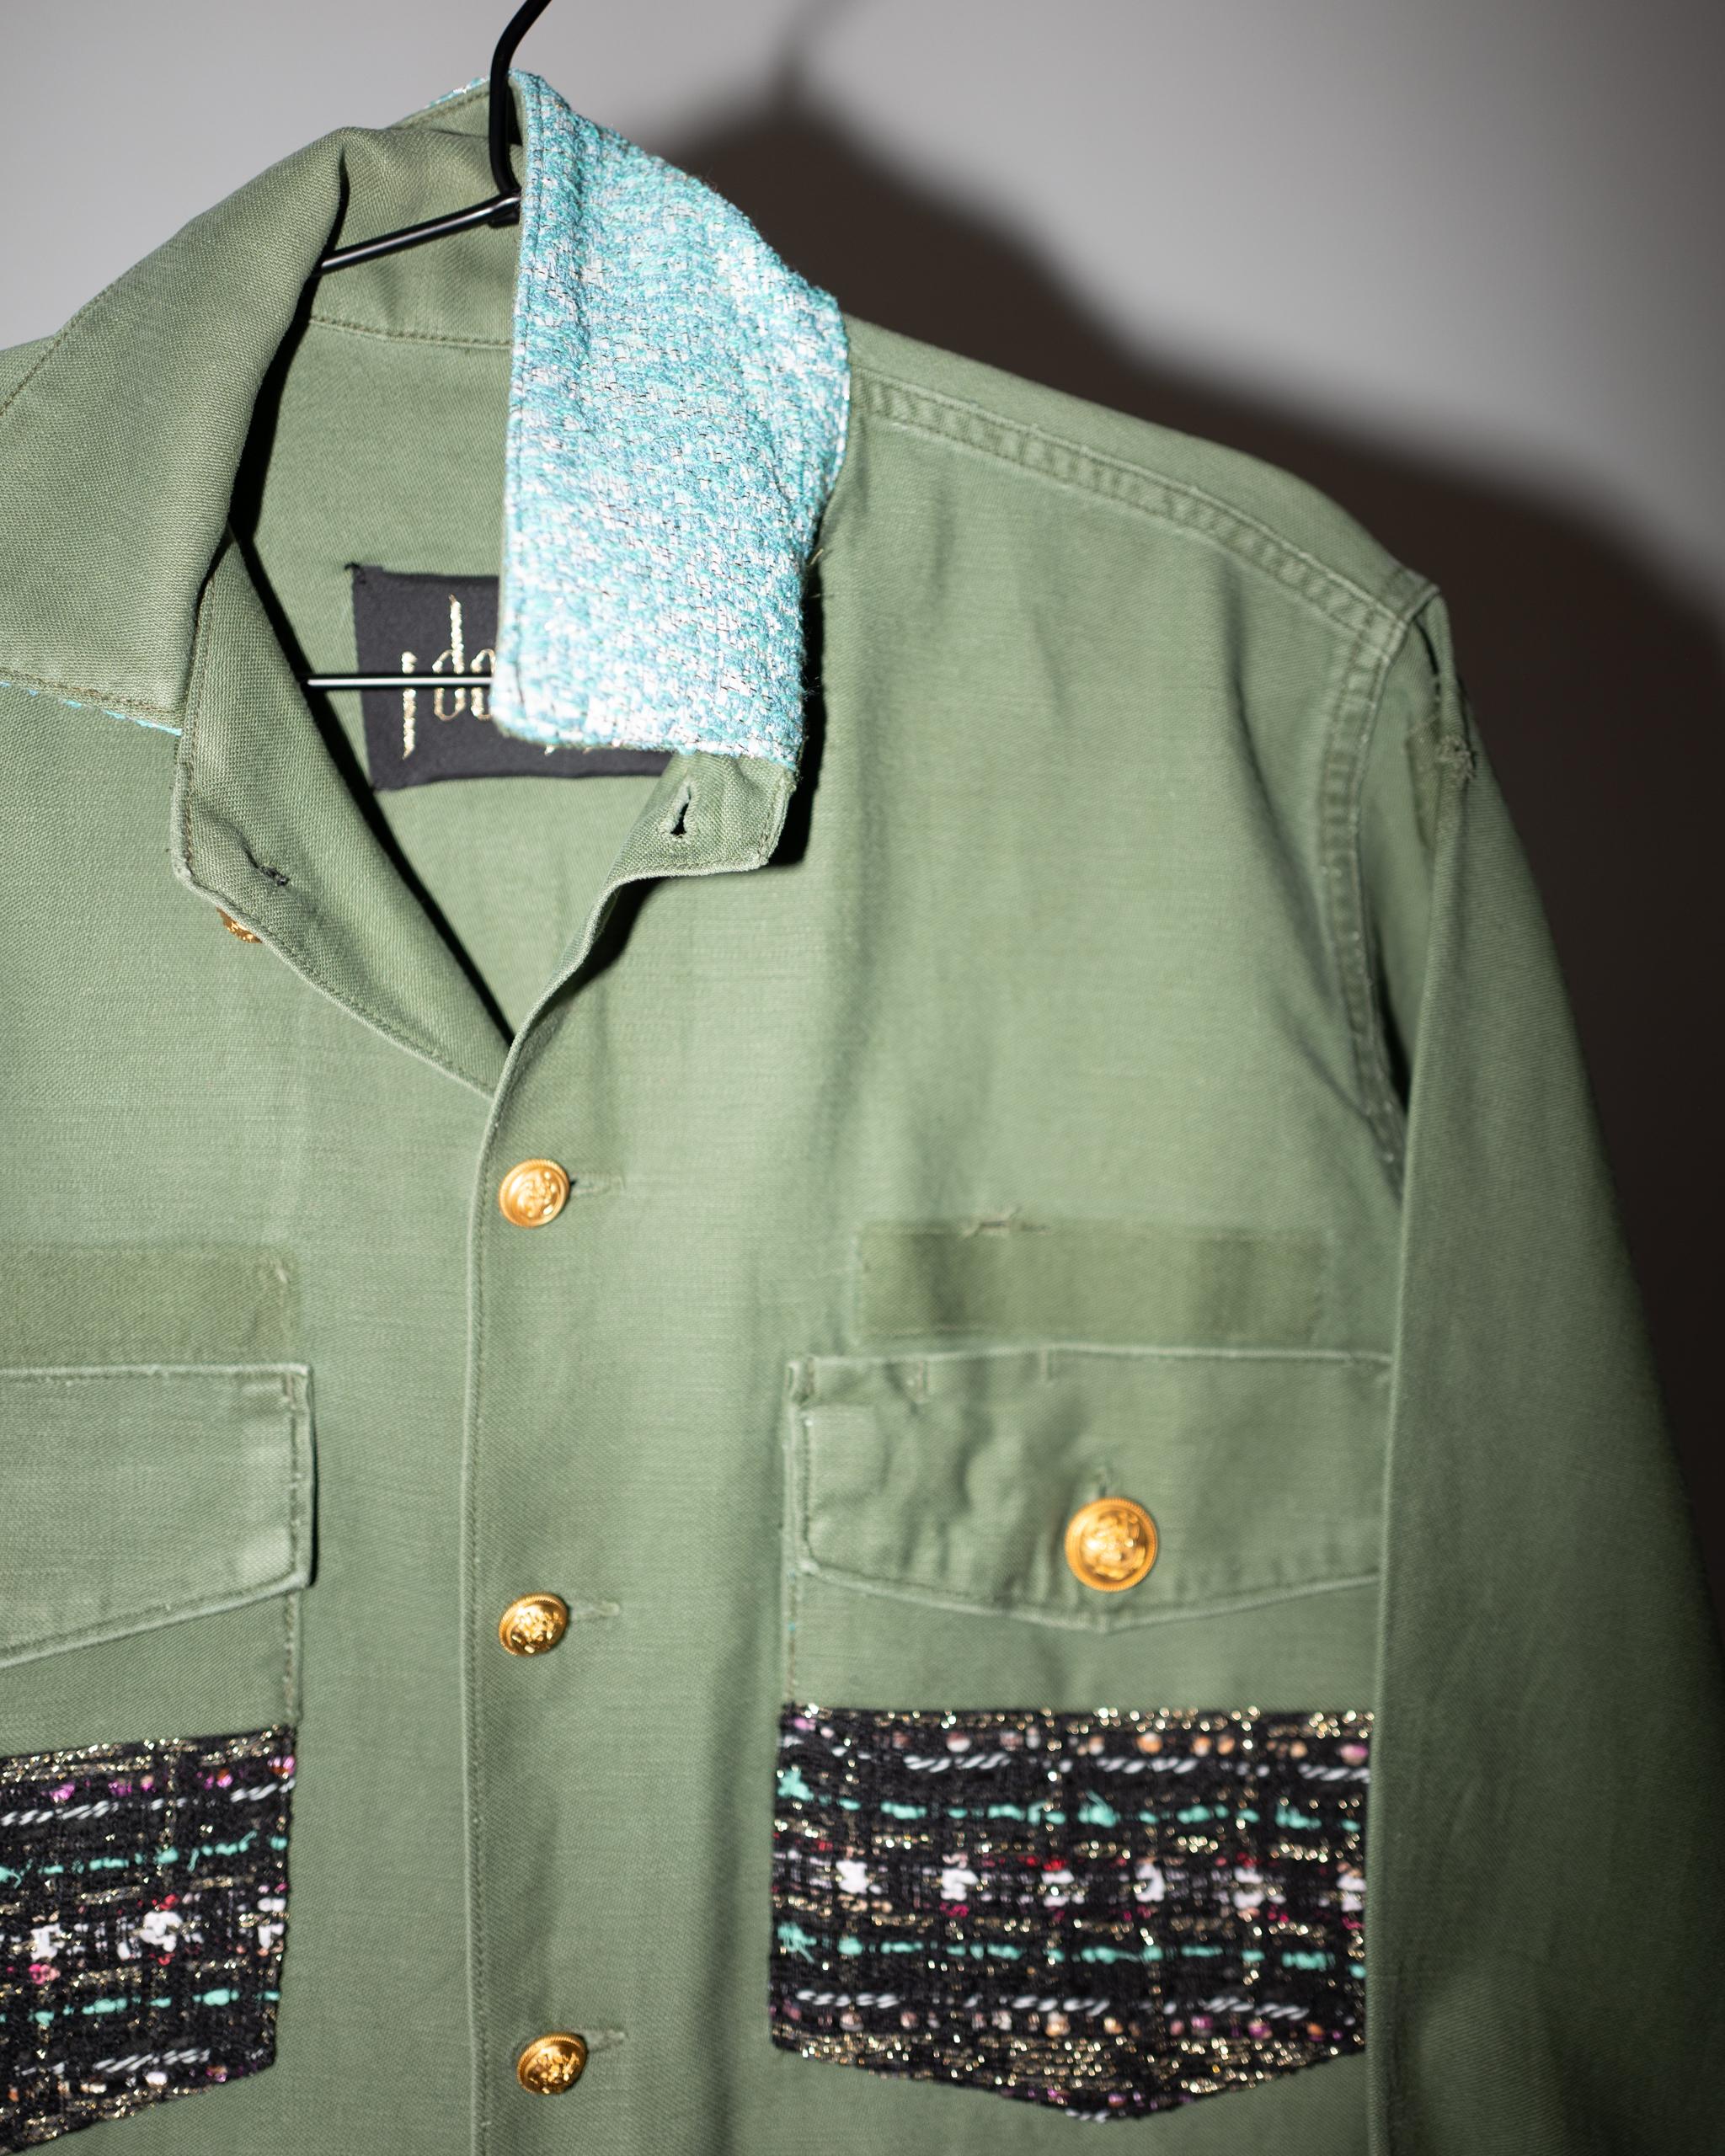 Vintage one of a kind distressed Green Military Jacket with French Black Lurex Tweed, Pastel Turquoise Green Lurex Collar Vintage Gold plated Brass Buttons from Paris around the 40